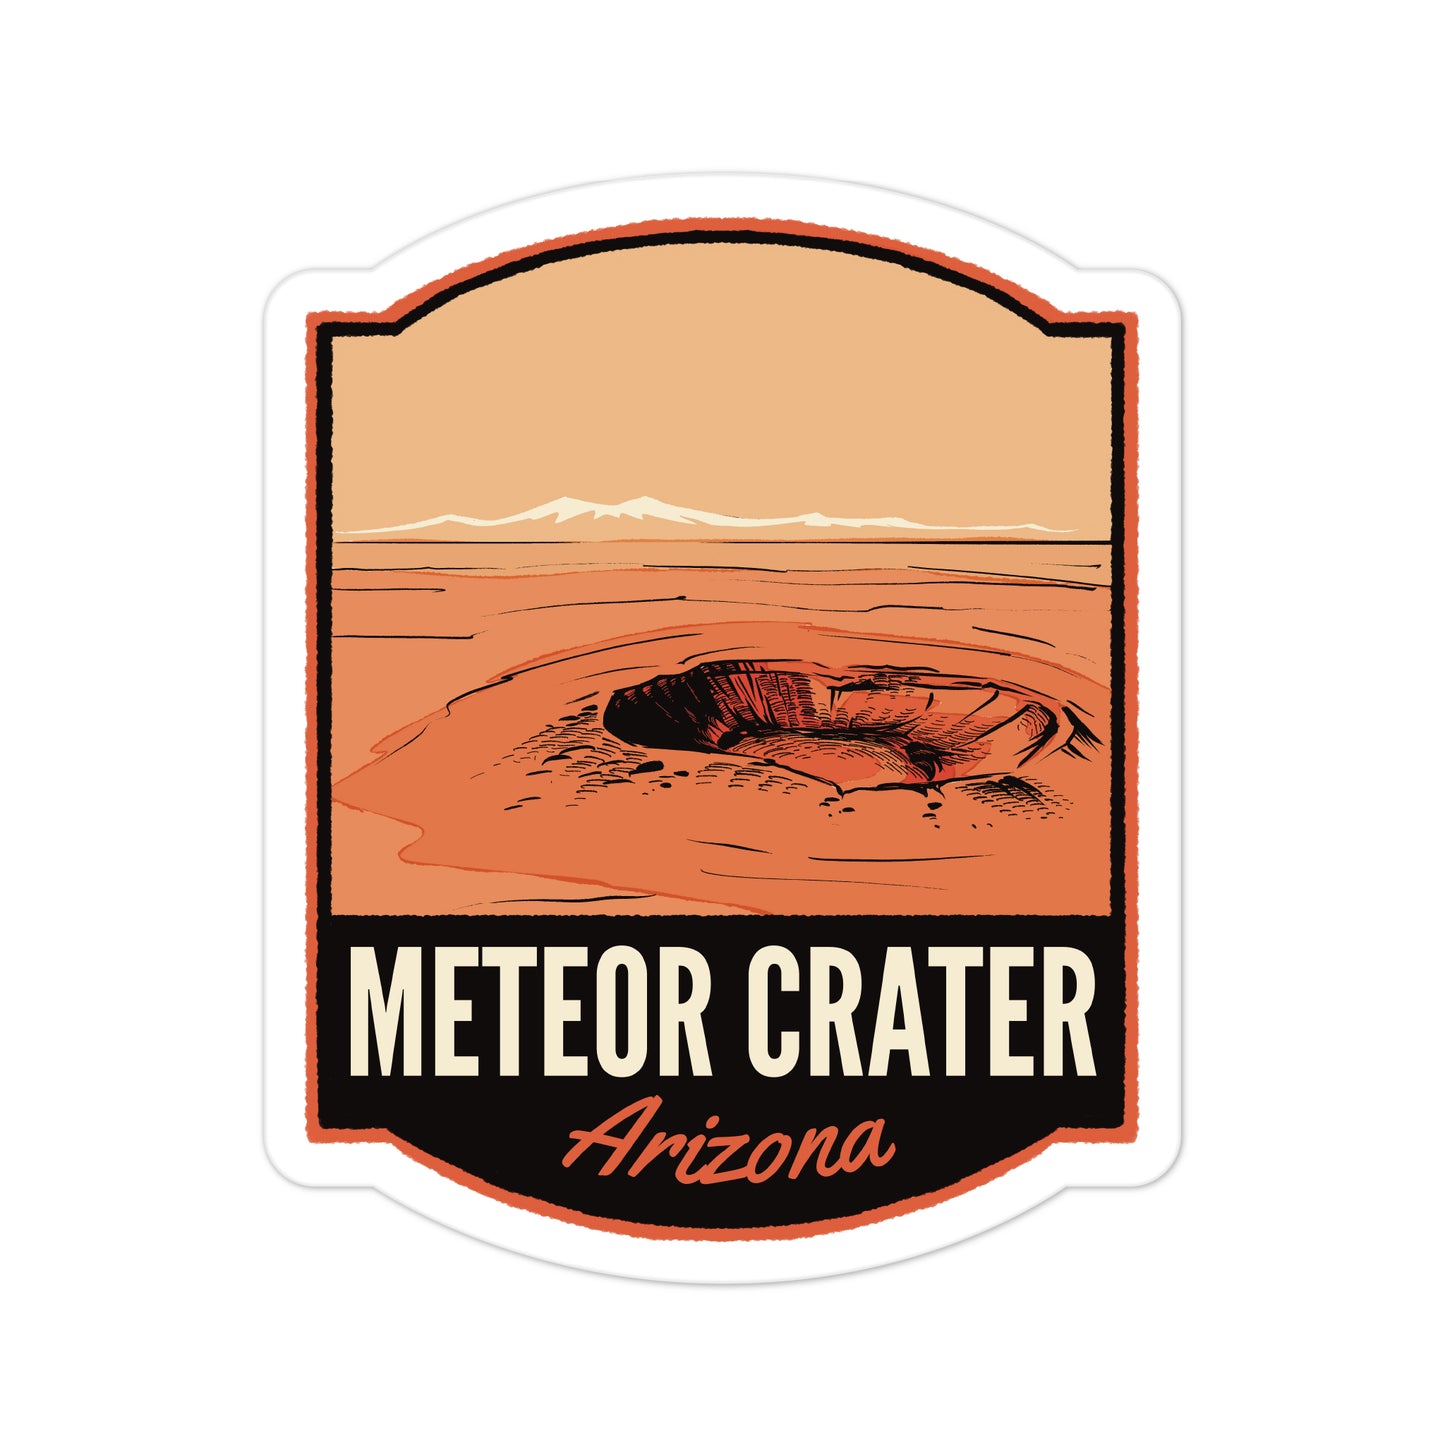 A sticker of Meteor Crater Arizona